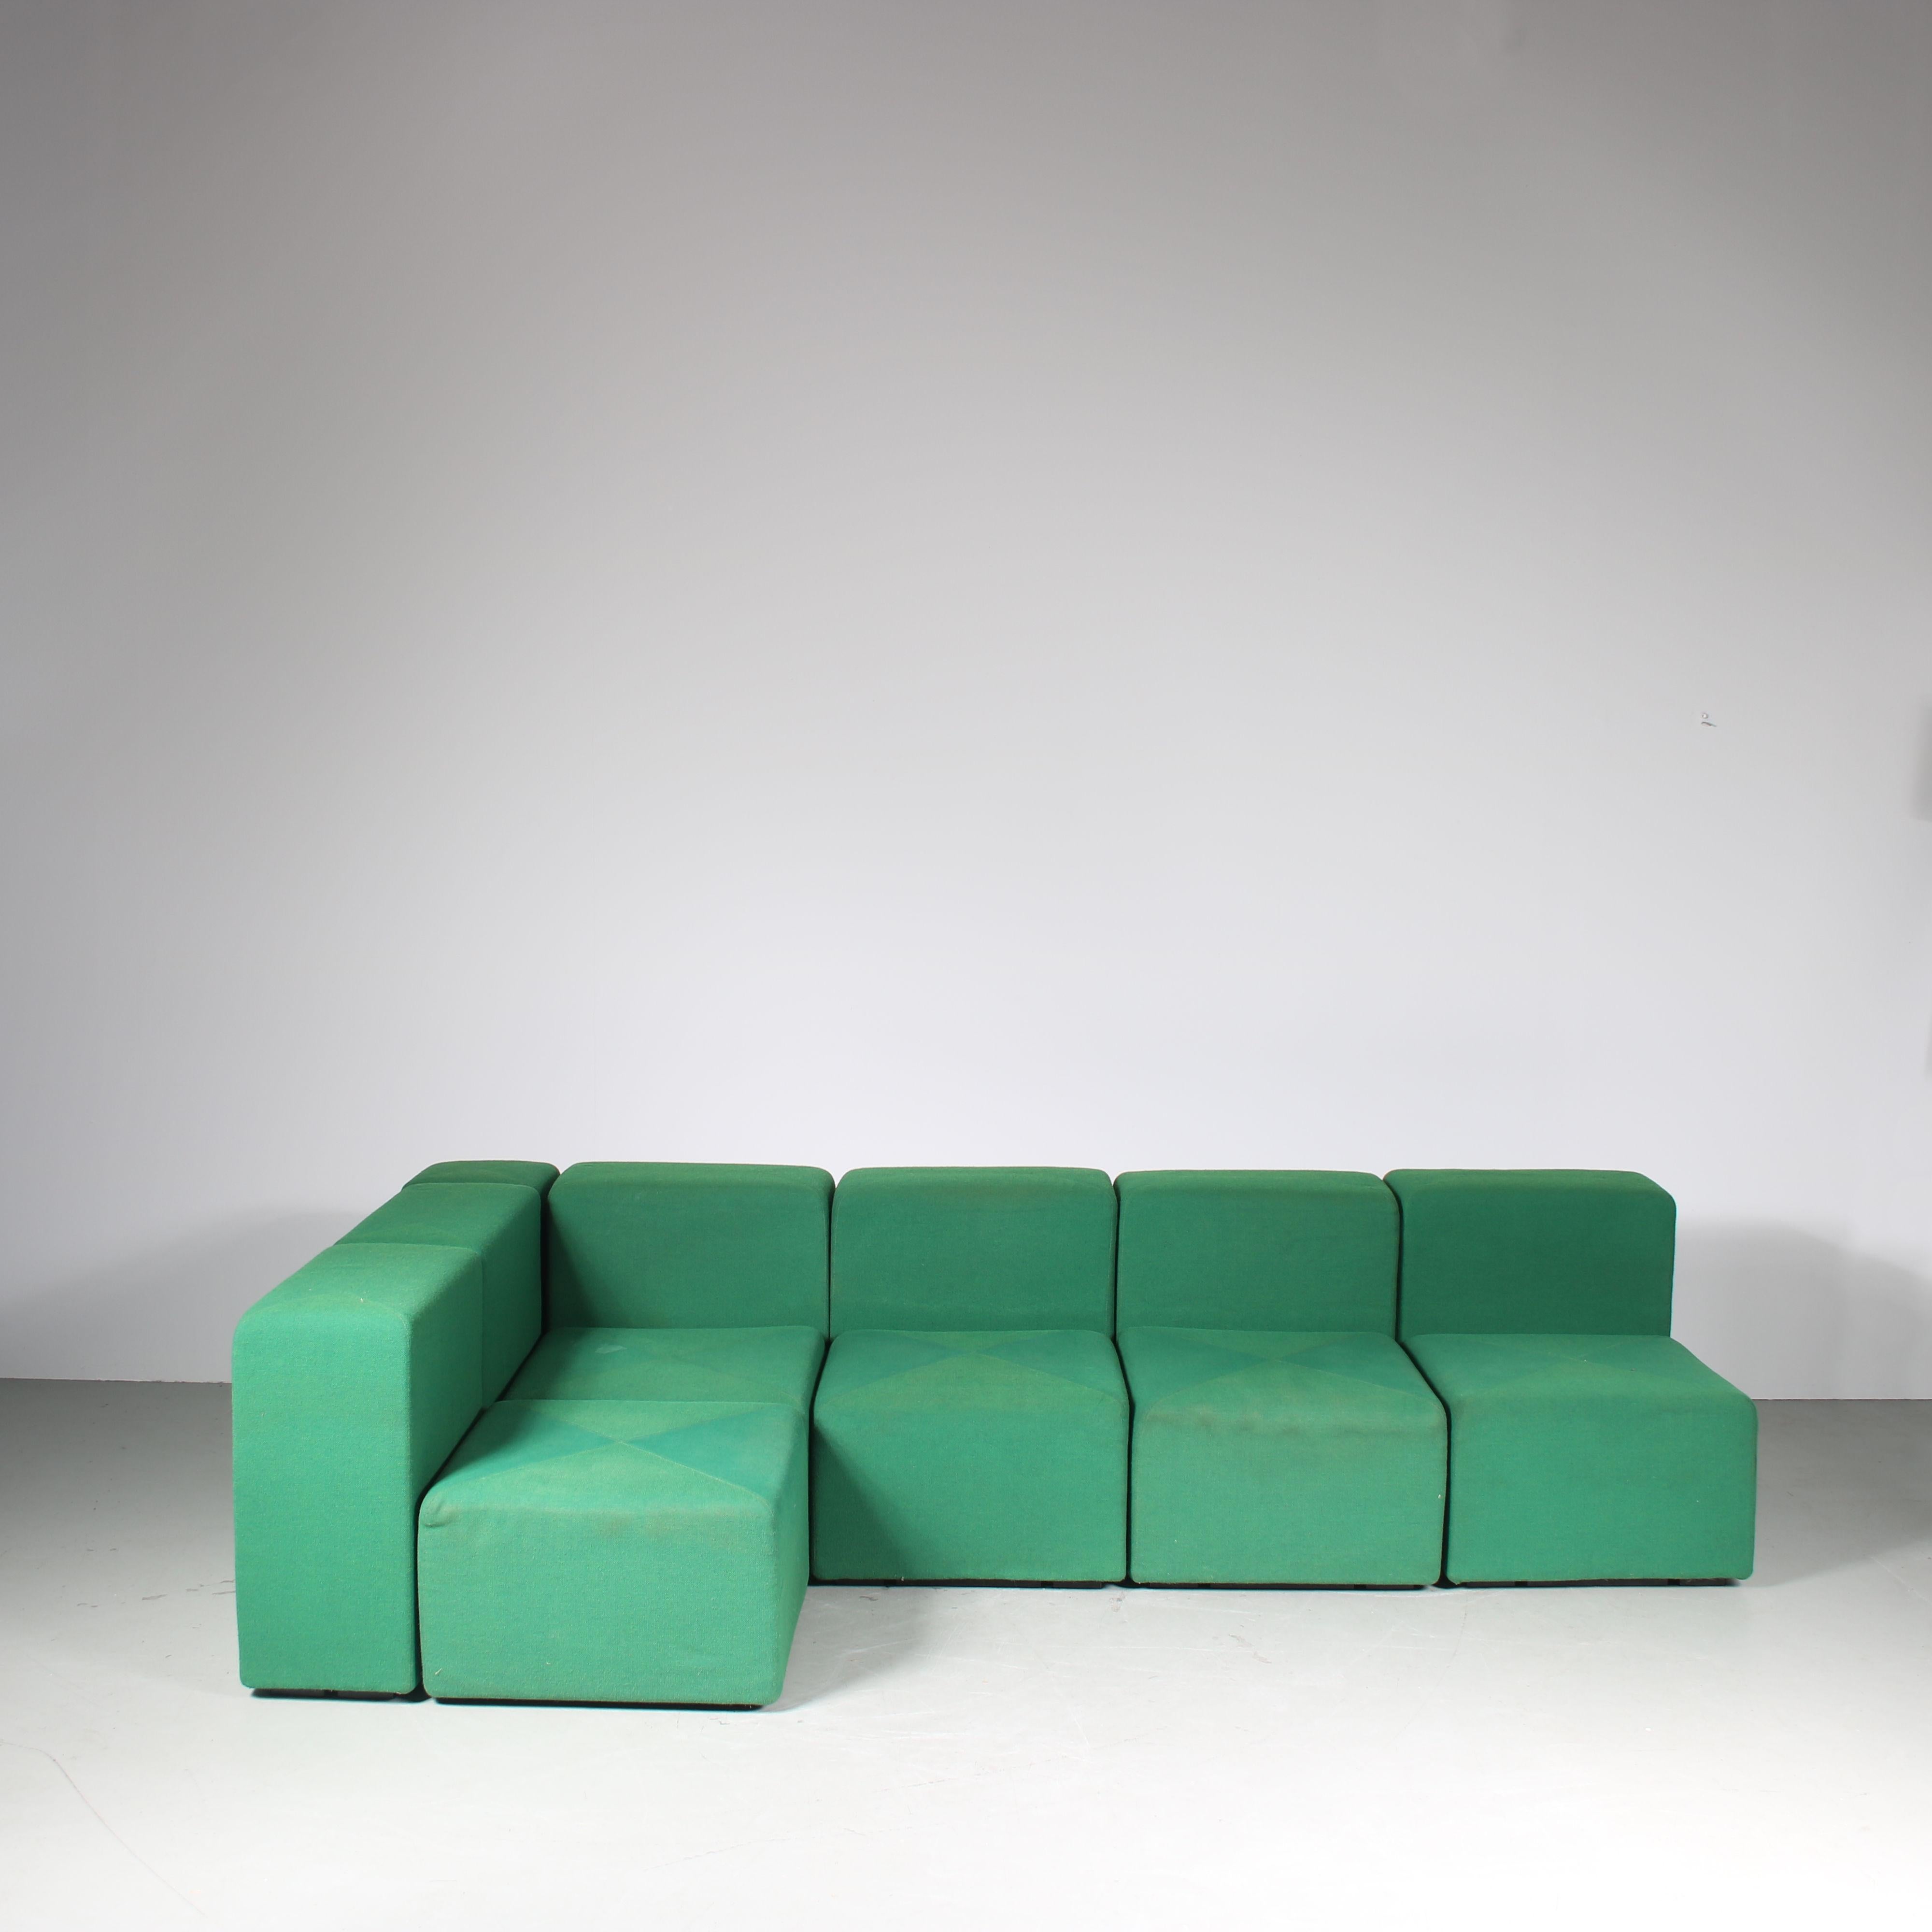 A fantastic 12-piece modular sofa, model Systema 61, designed by Giancarlo Piretti and manufactured by Anonima Castelli in Italy around 1970.

This iconic piece is a highly recognizable and much sought after piece of mid-century design! It contains